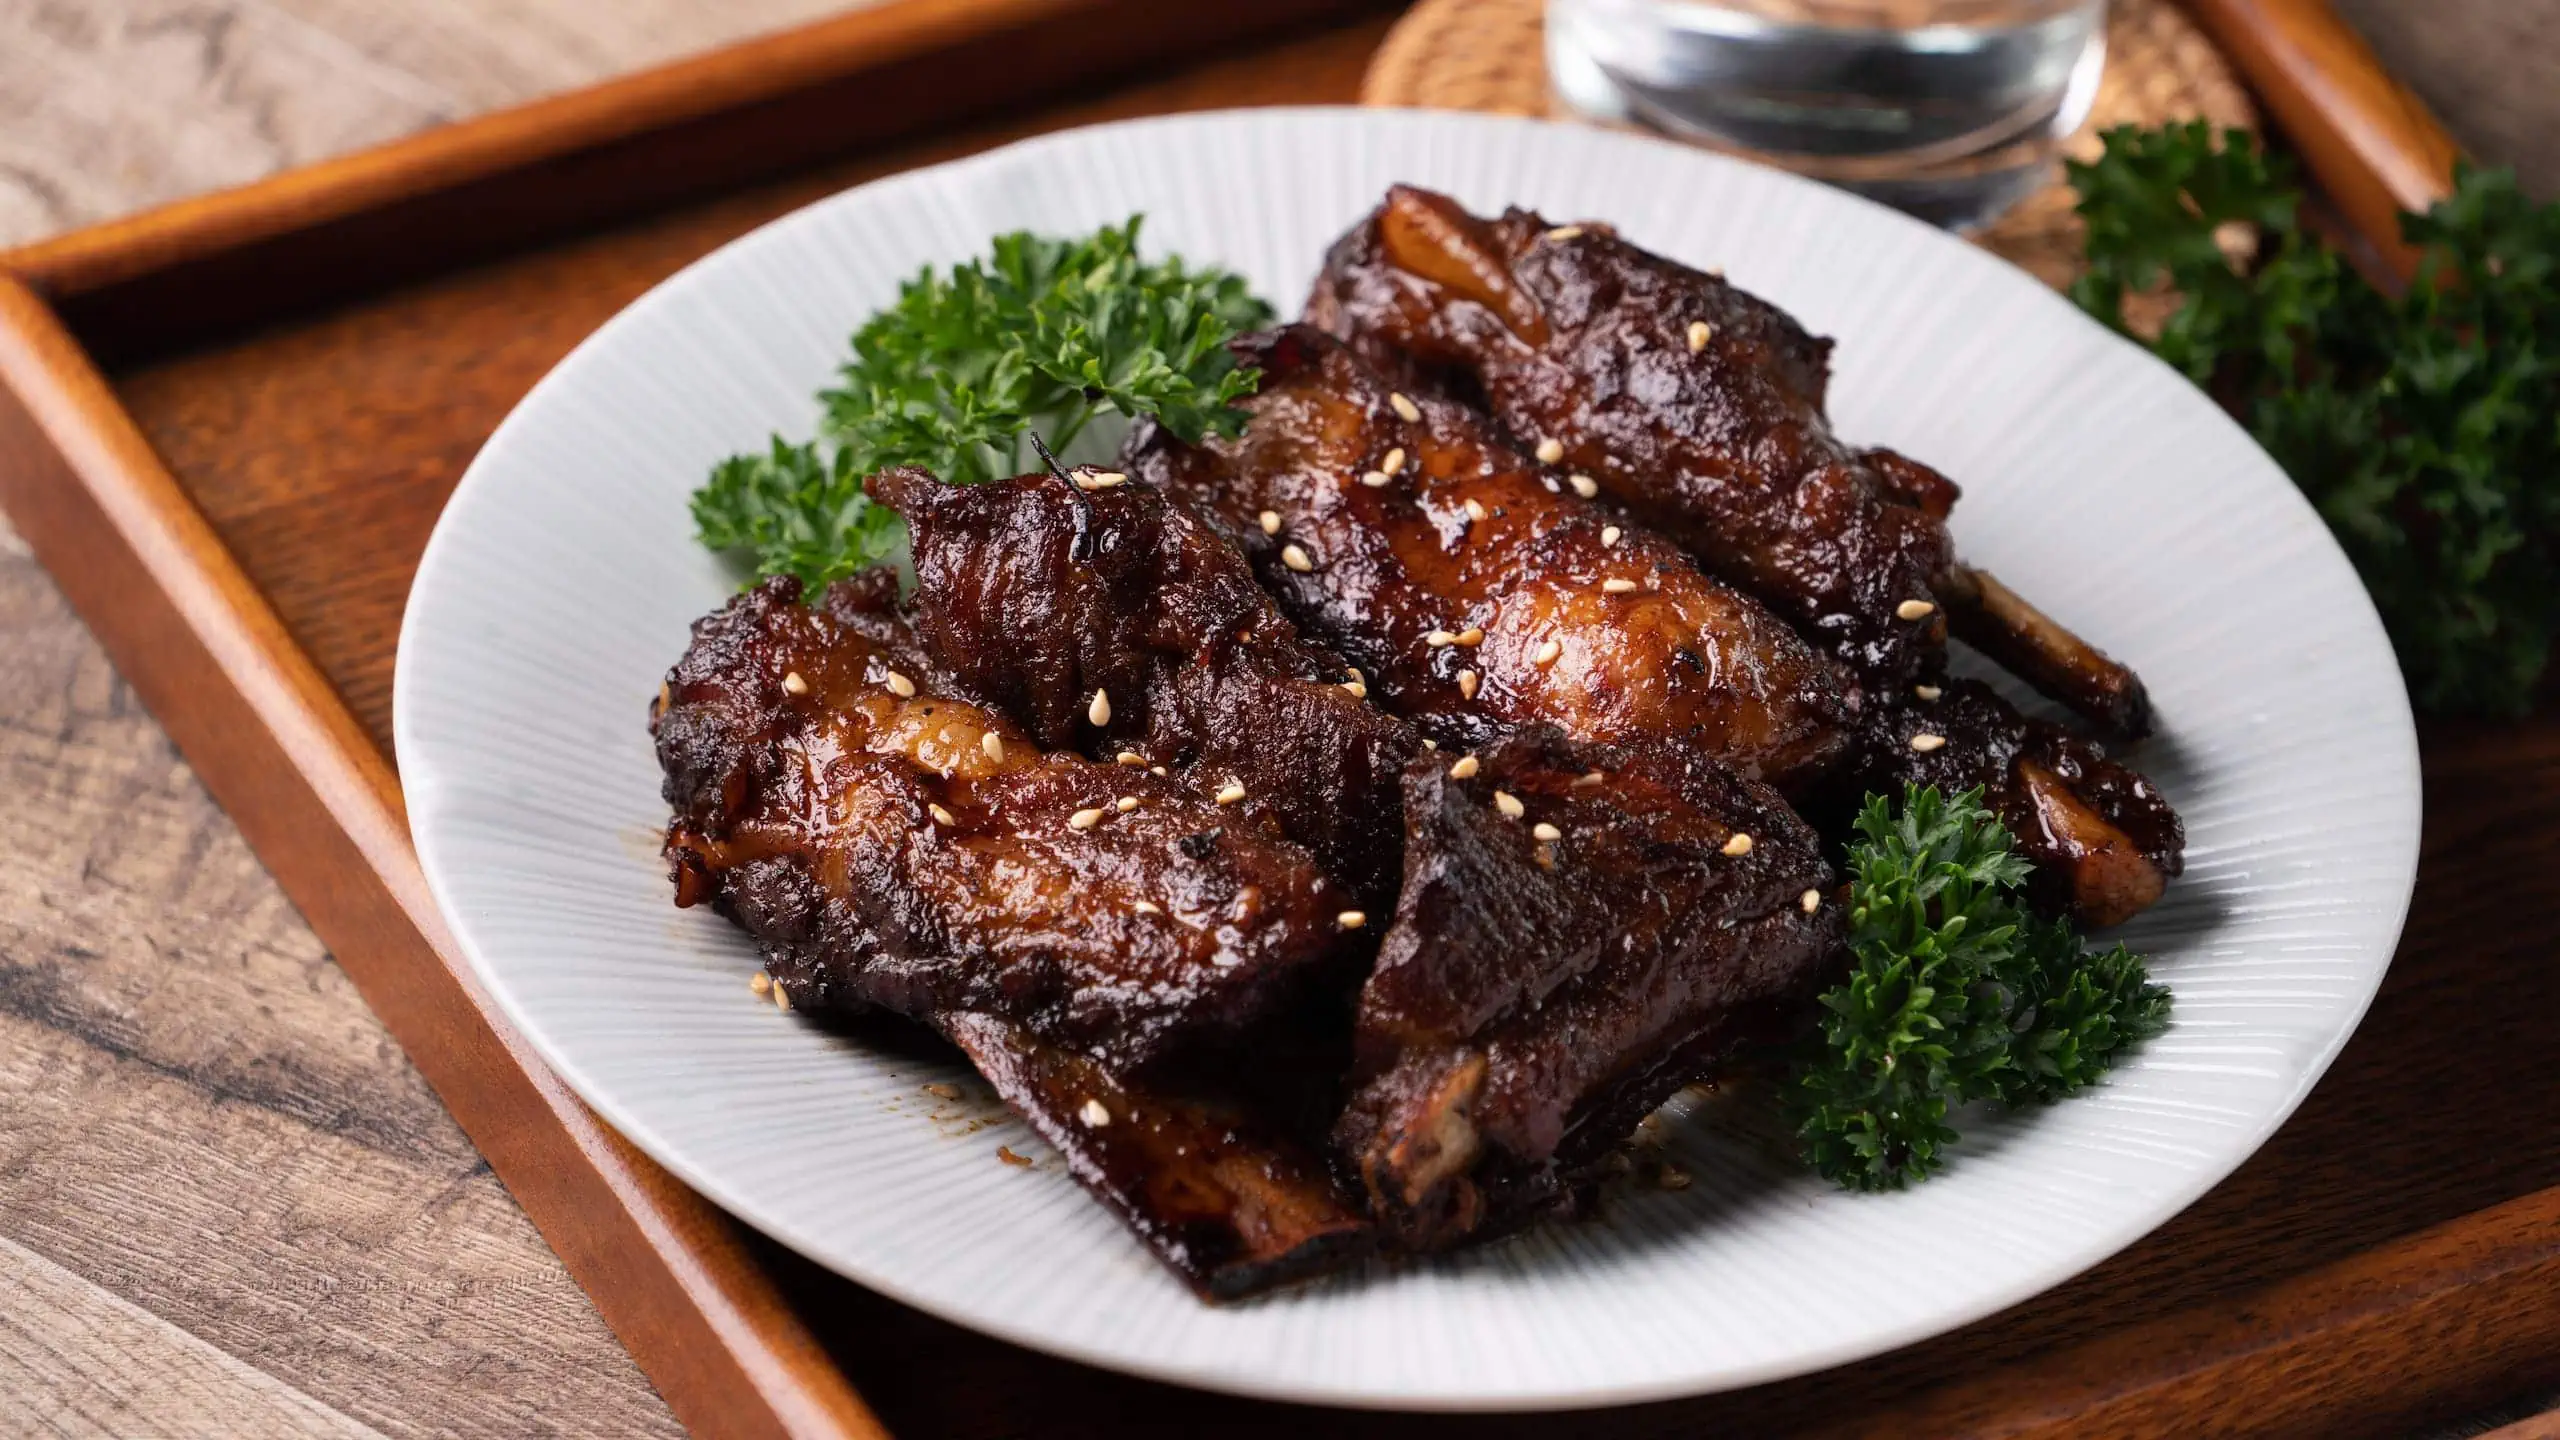 Our homemade Masterchef beef short ribs recipe